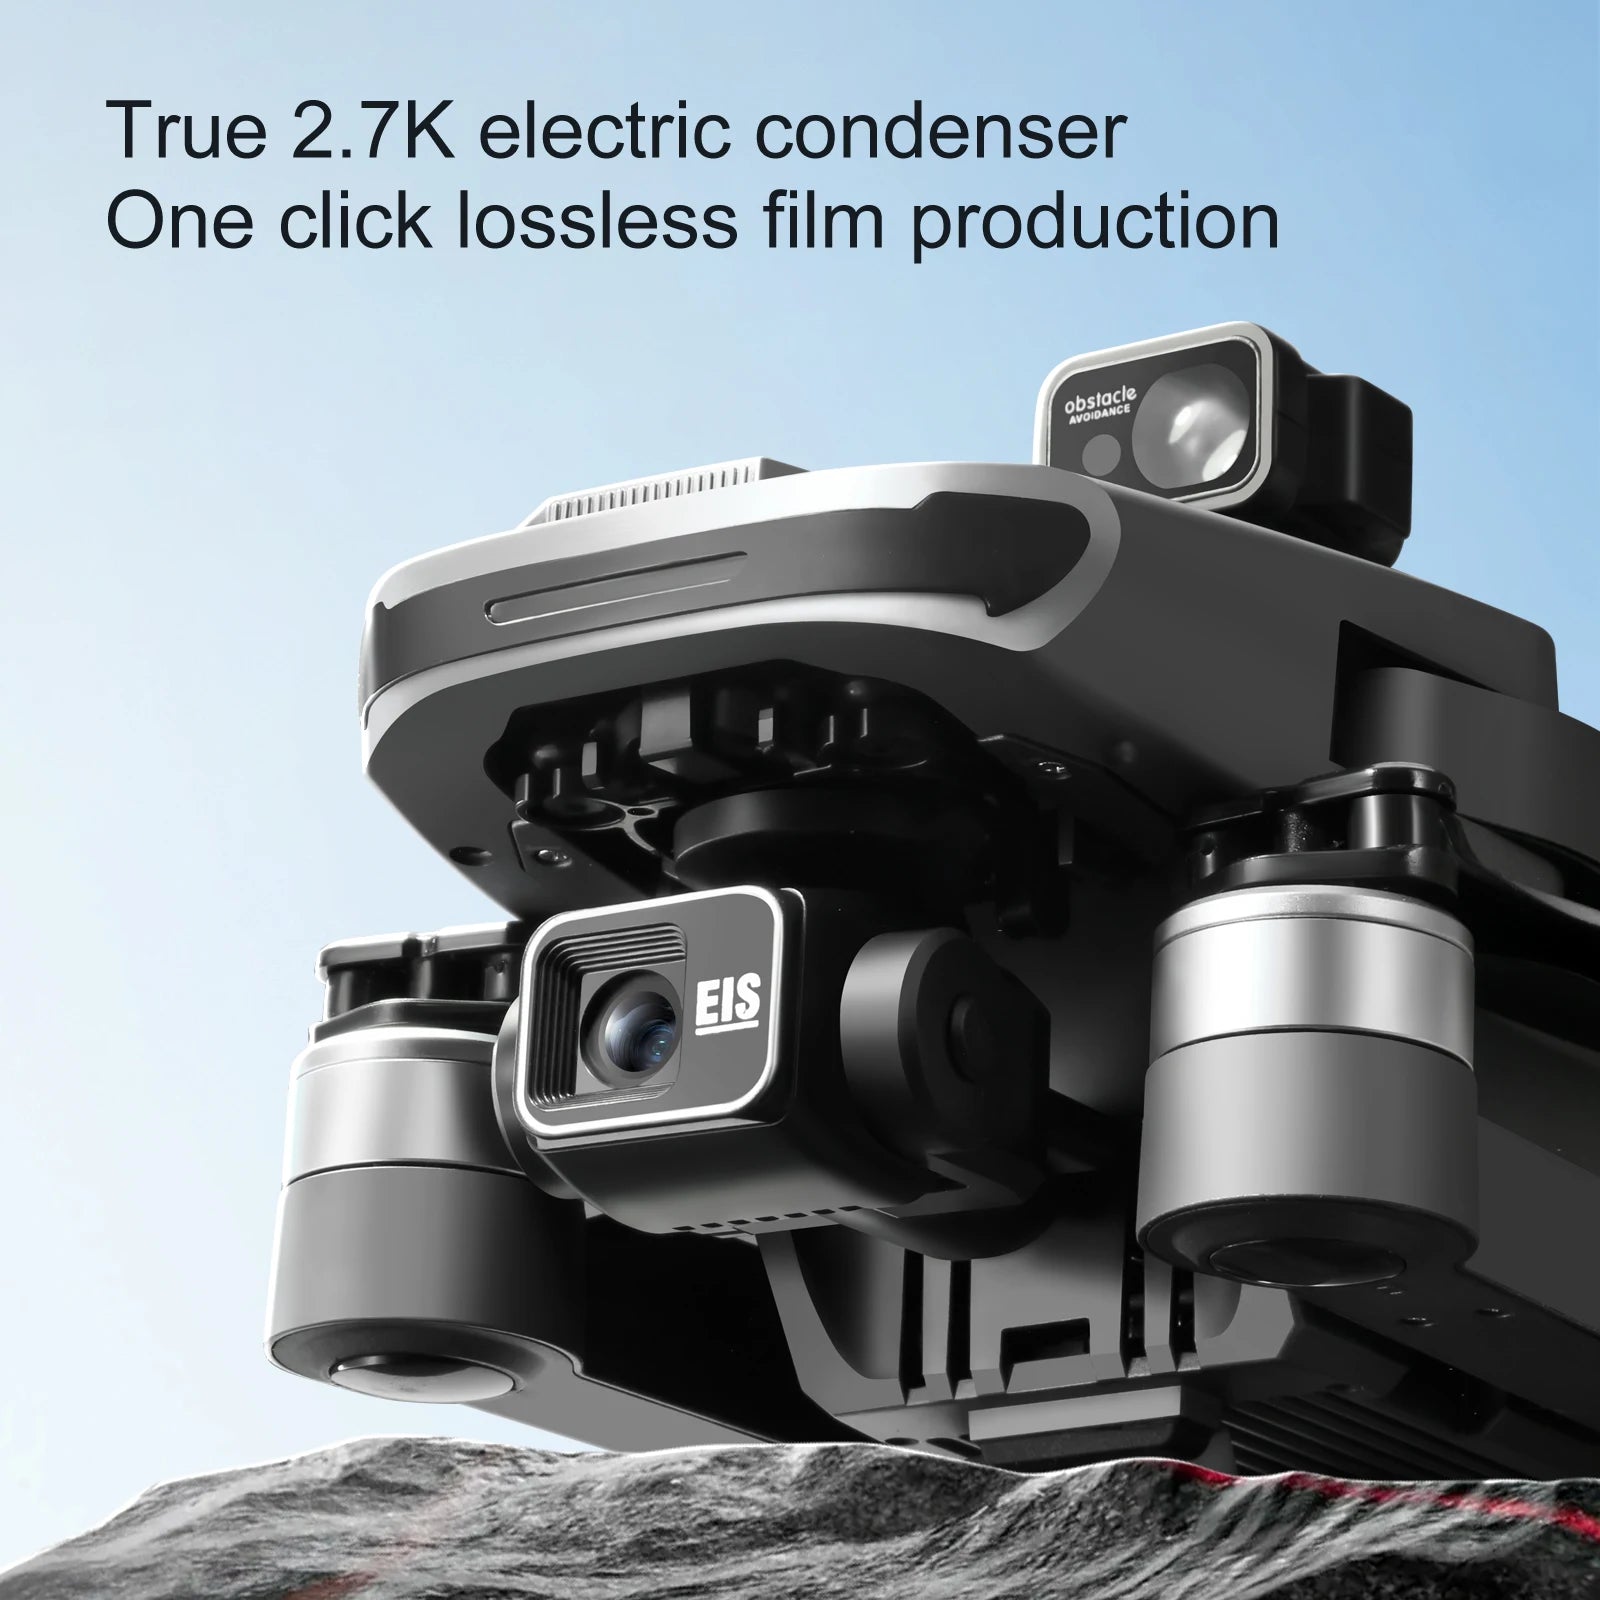 S155 Drone, True 2.7K electric condenser One click lossless film production obstacle avoidance E